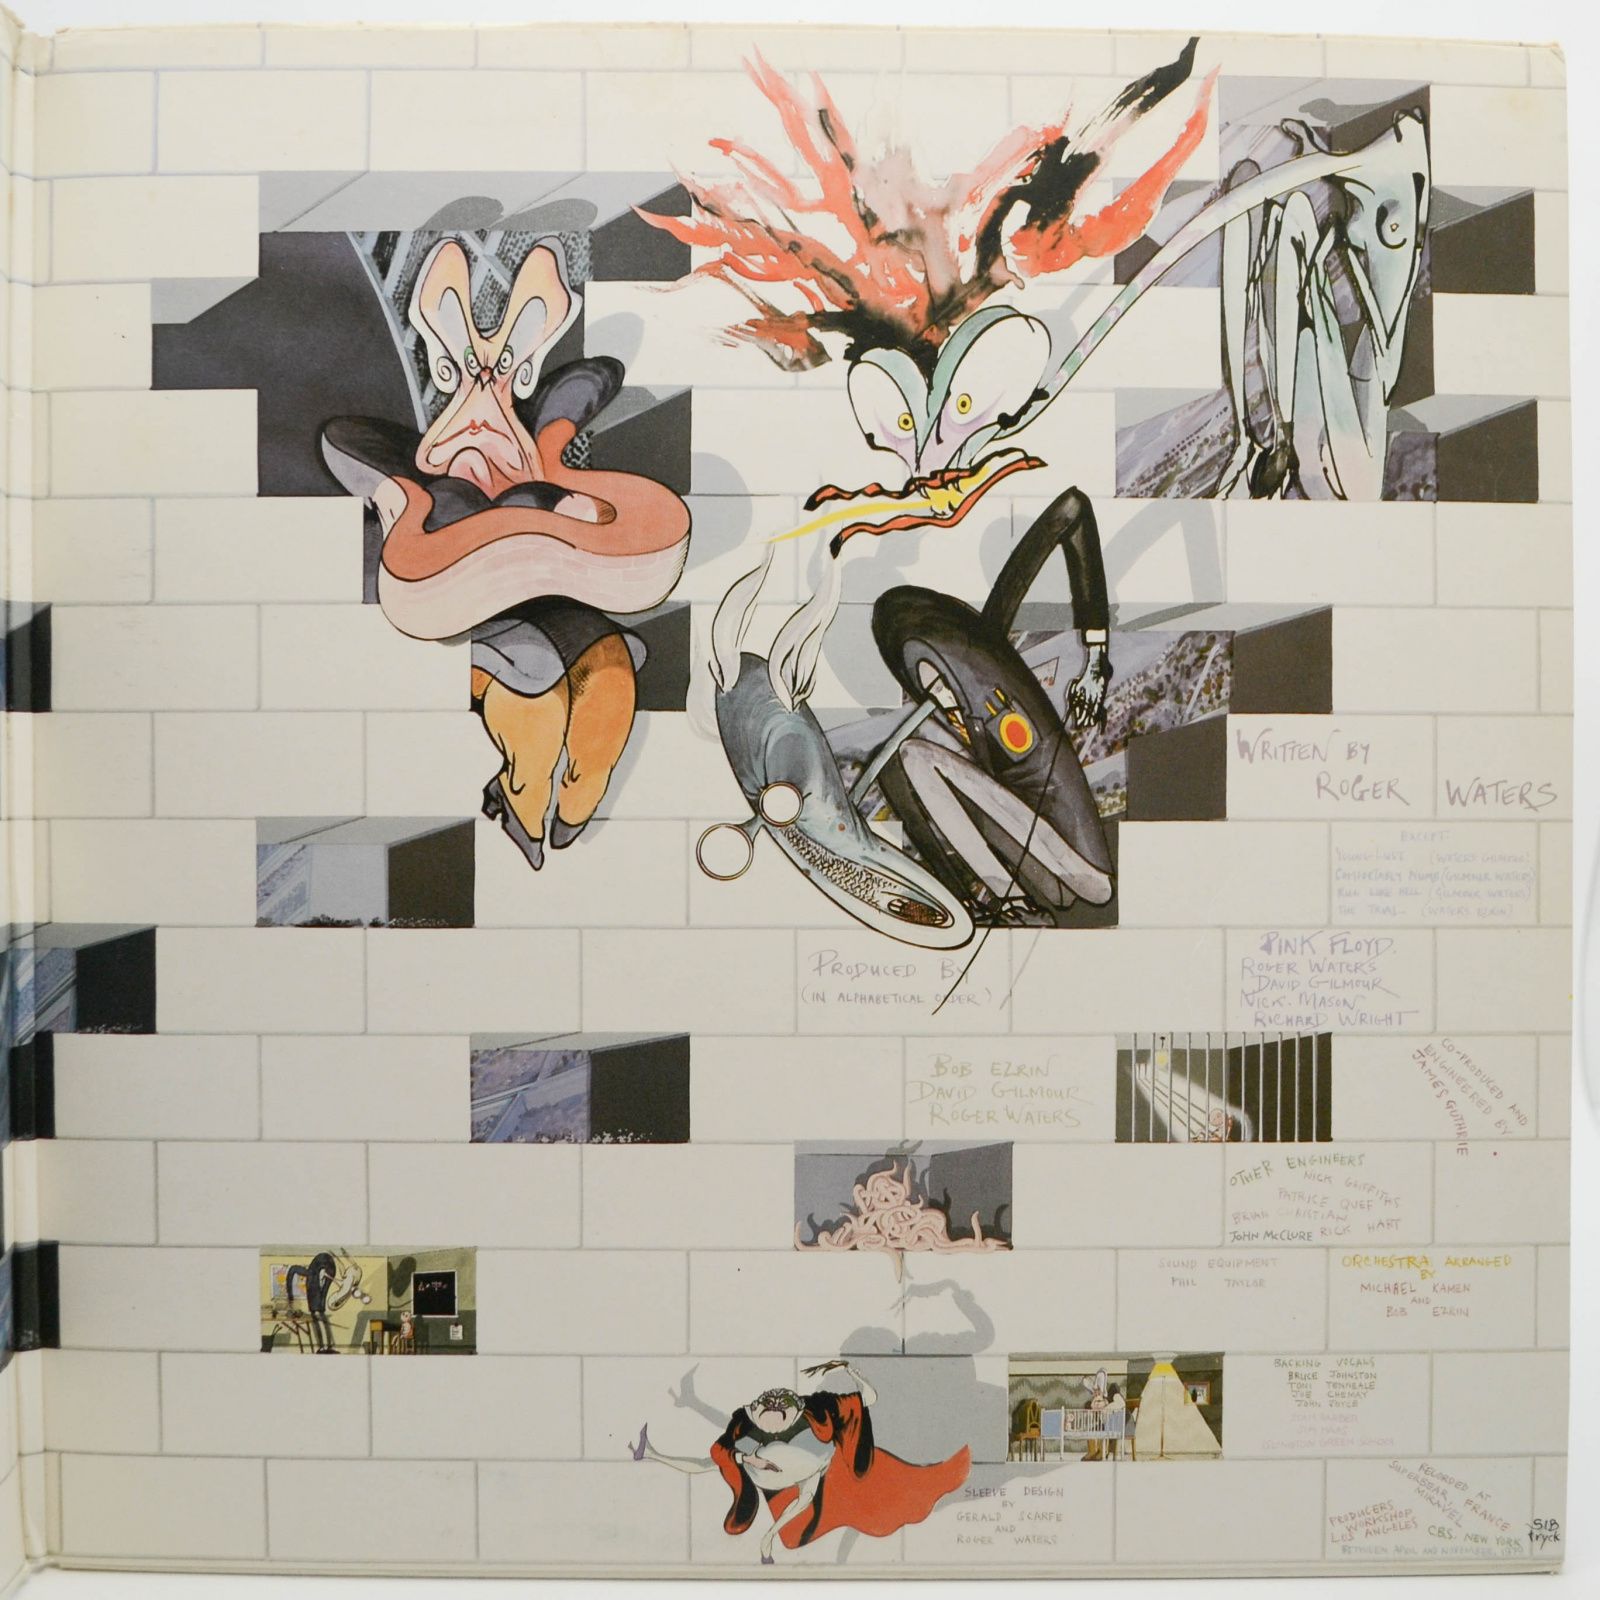 Pink Floyd — The Wall (2LP), 1979